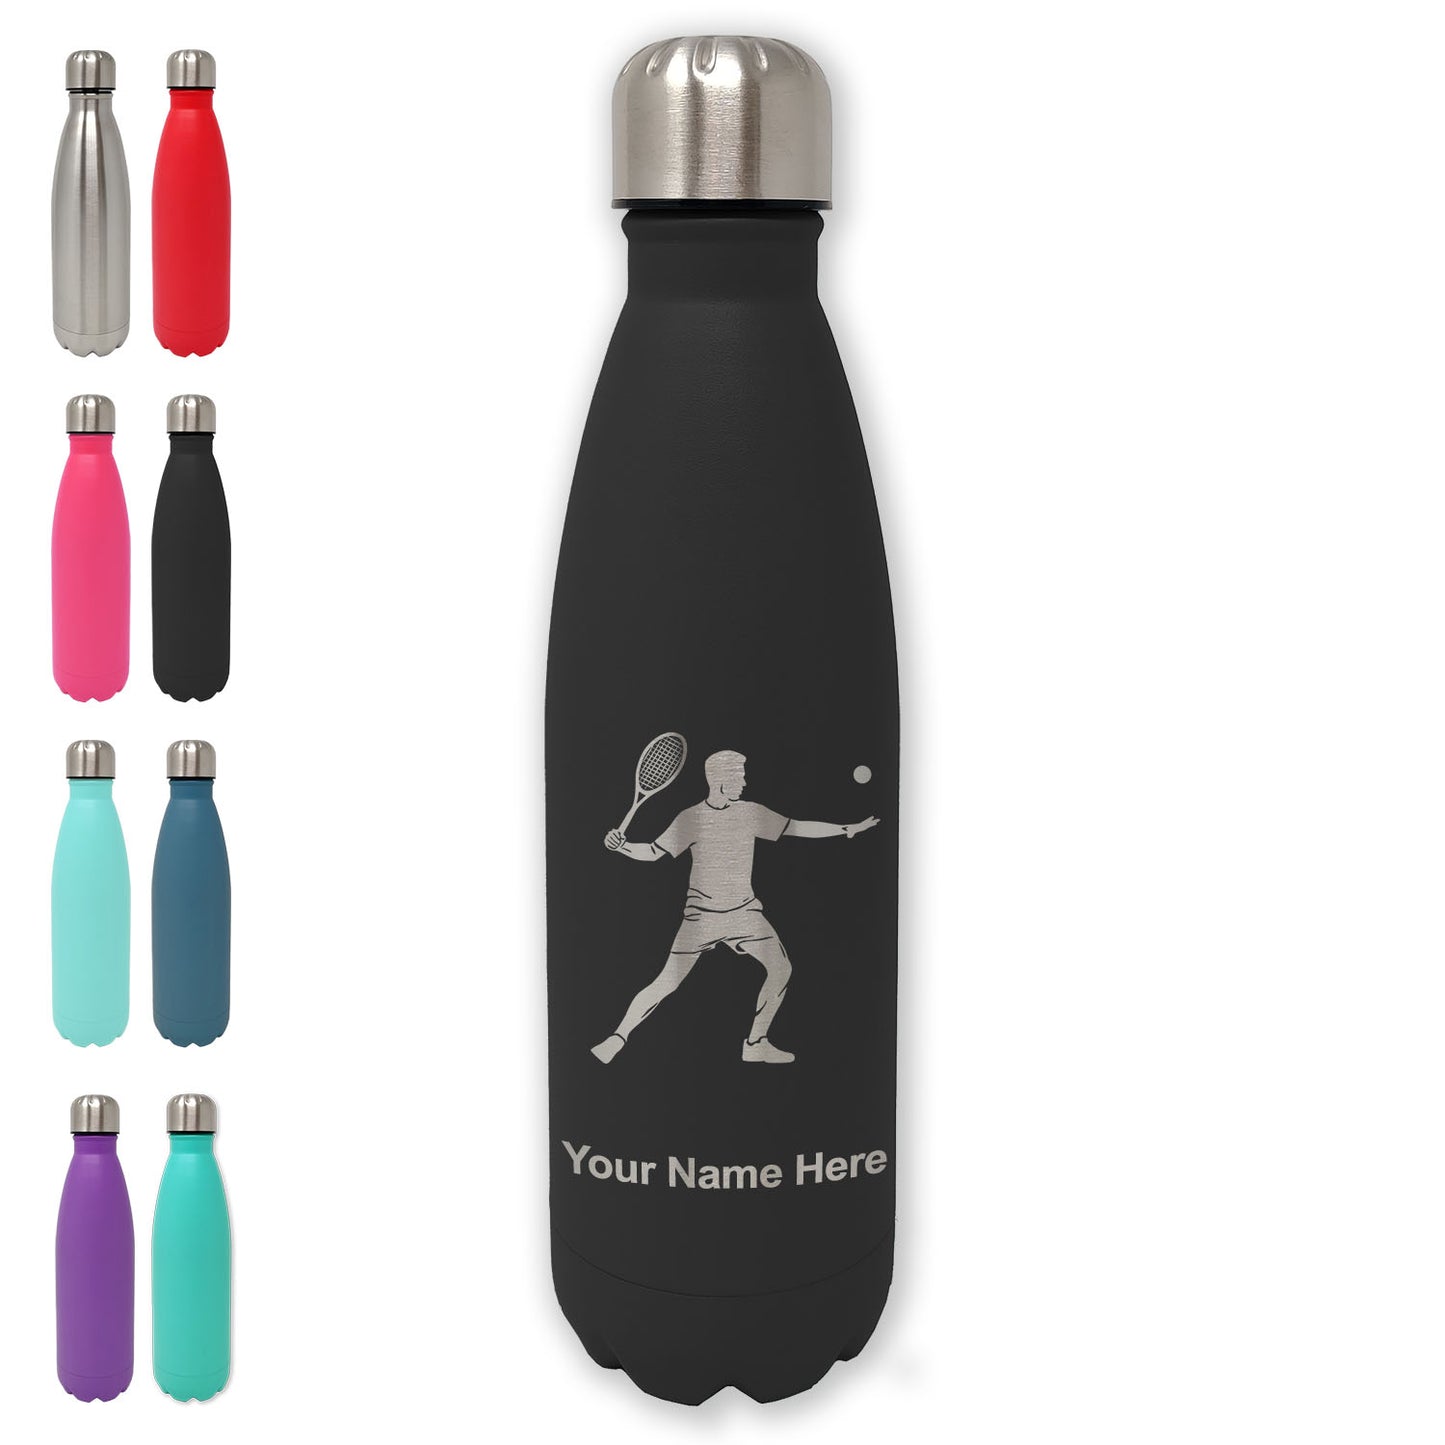 LaserGram Double Wall Water Bottle, Tennis Player Man, Personalized Engraving Included